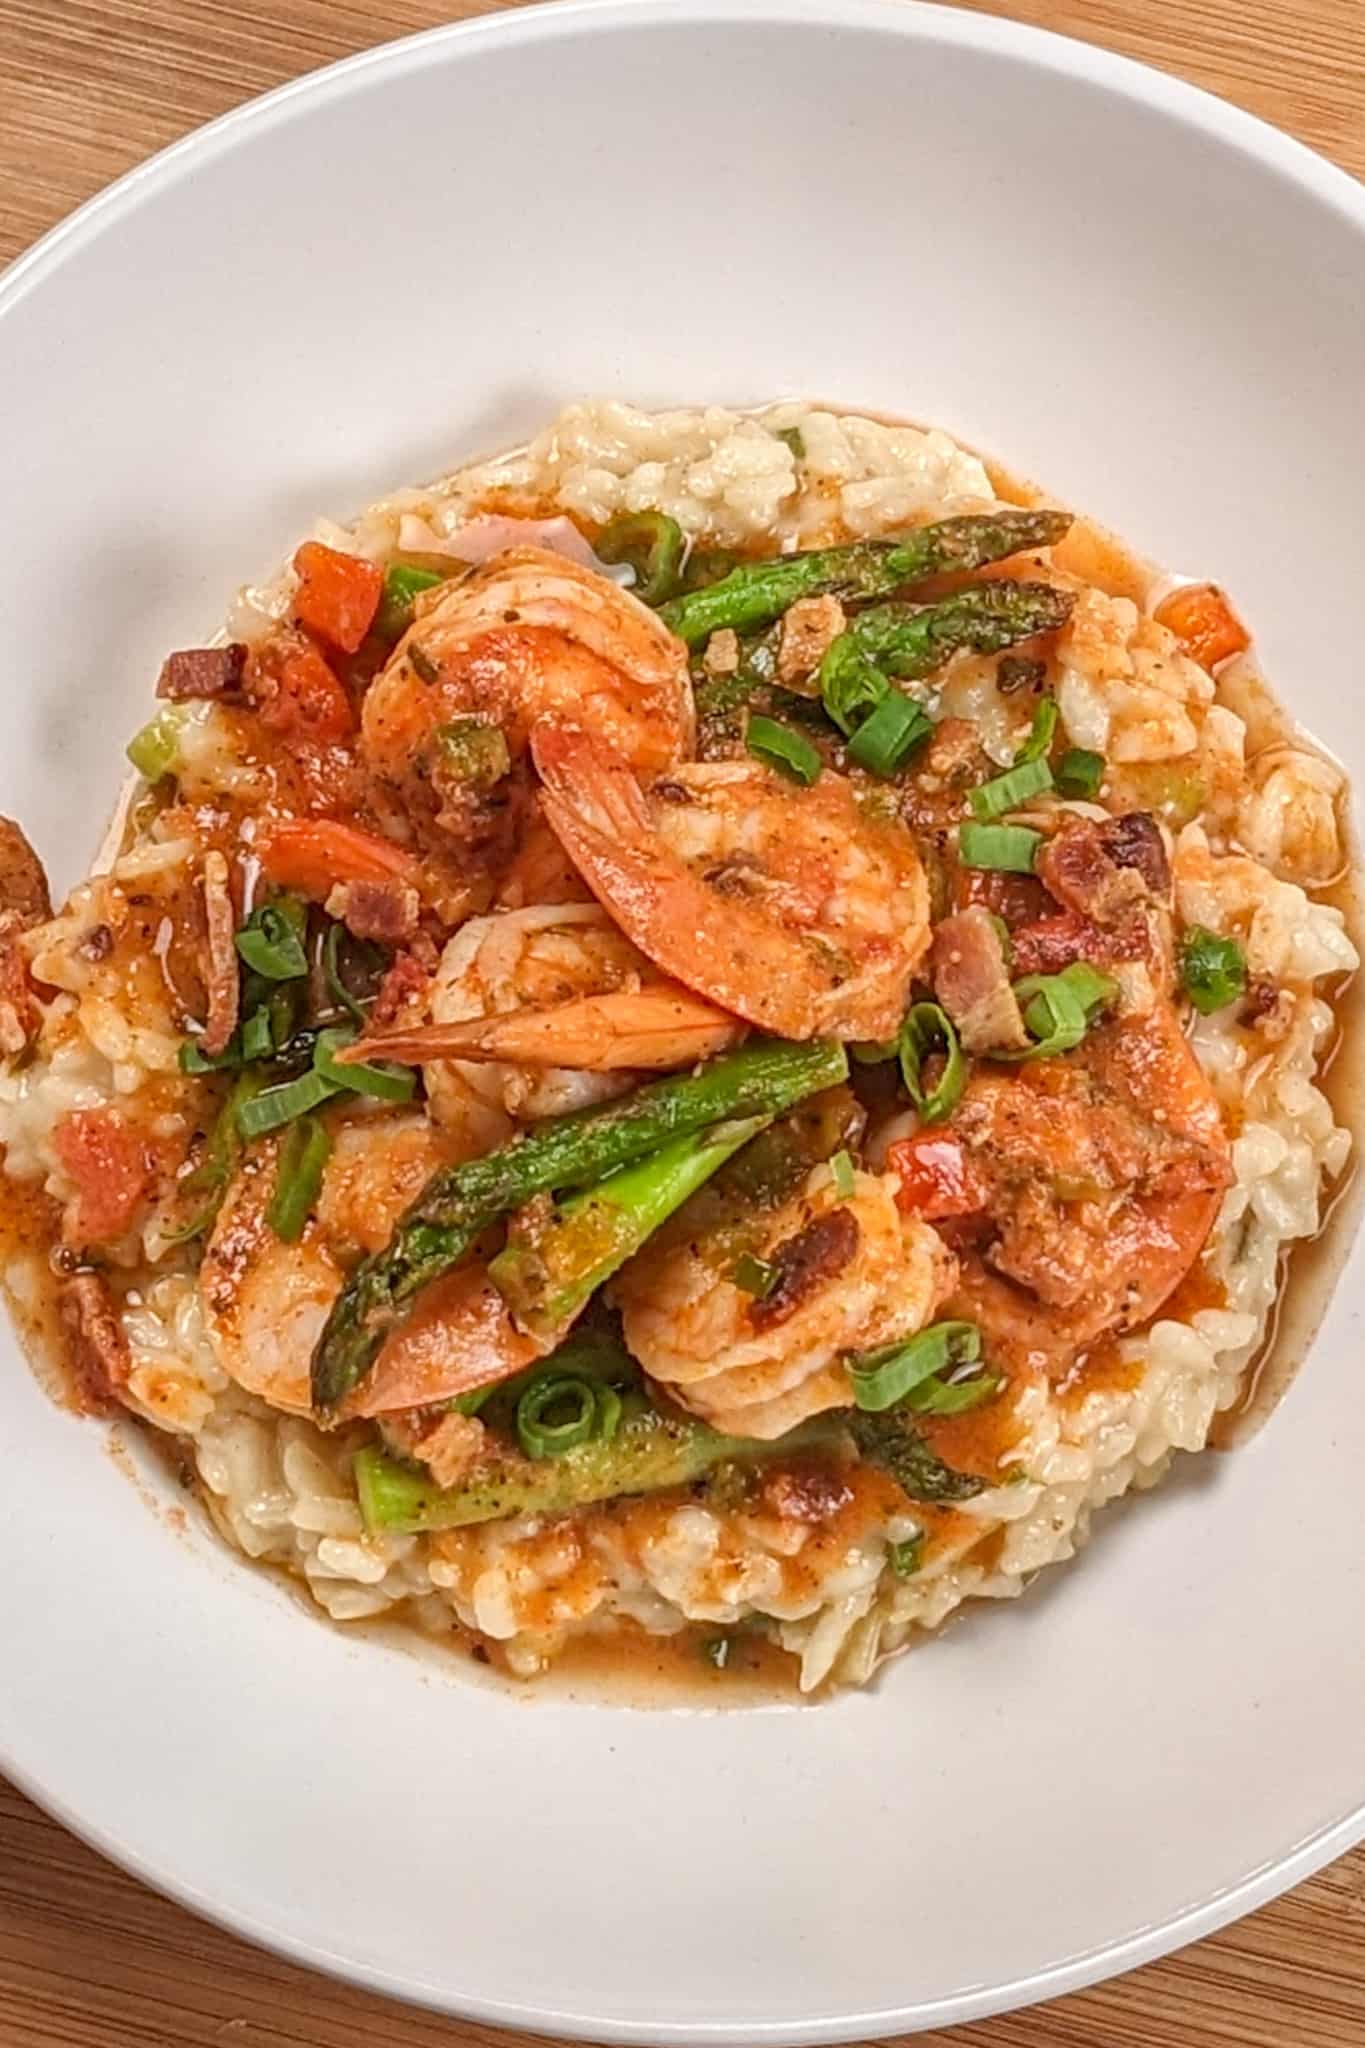 Top view of the Spicy Creole Shrimp and White Cheddar Cheese Risotto in a wide rim bowl.